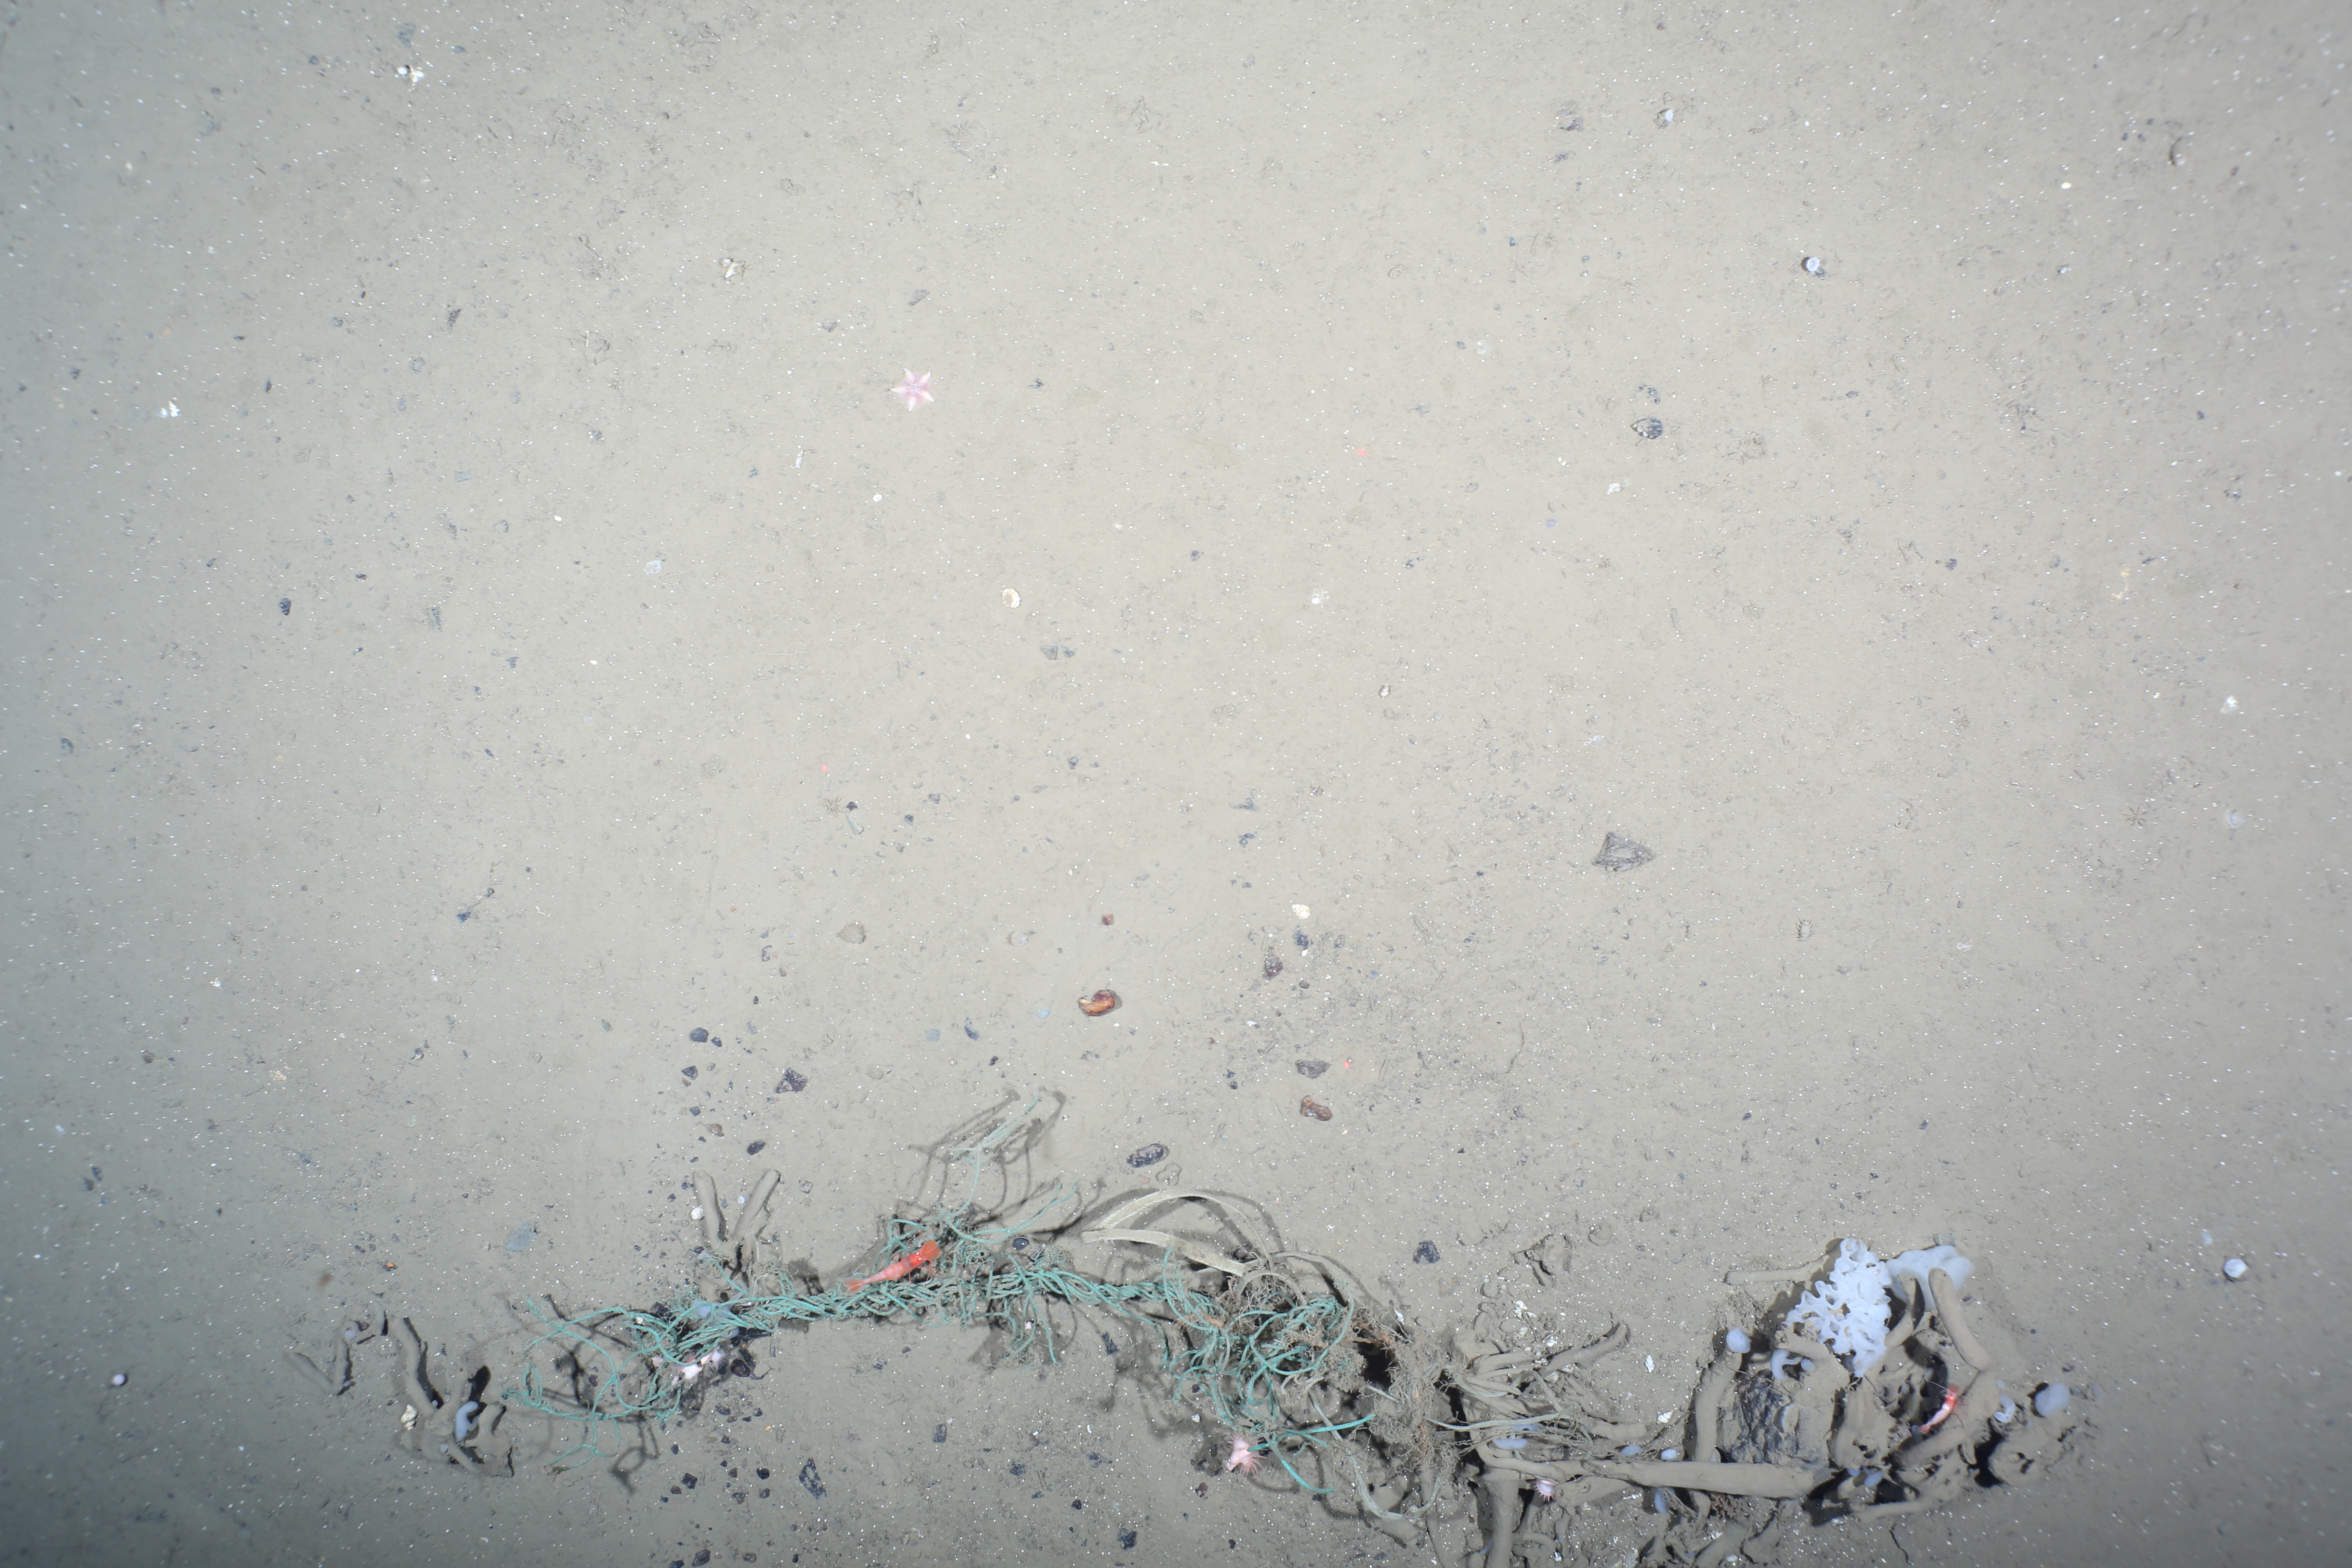 Researchers find growing piles of trash on the Arctic seabed